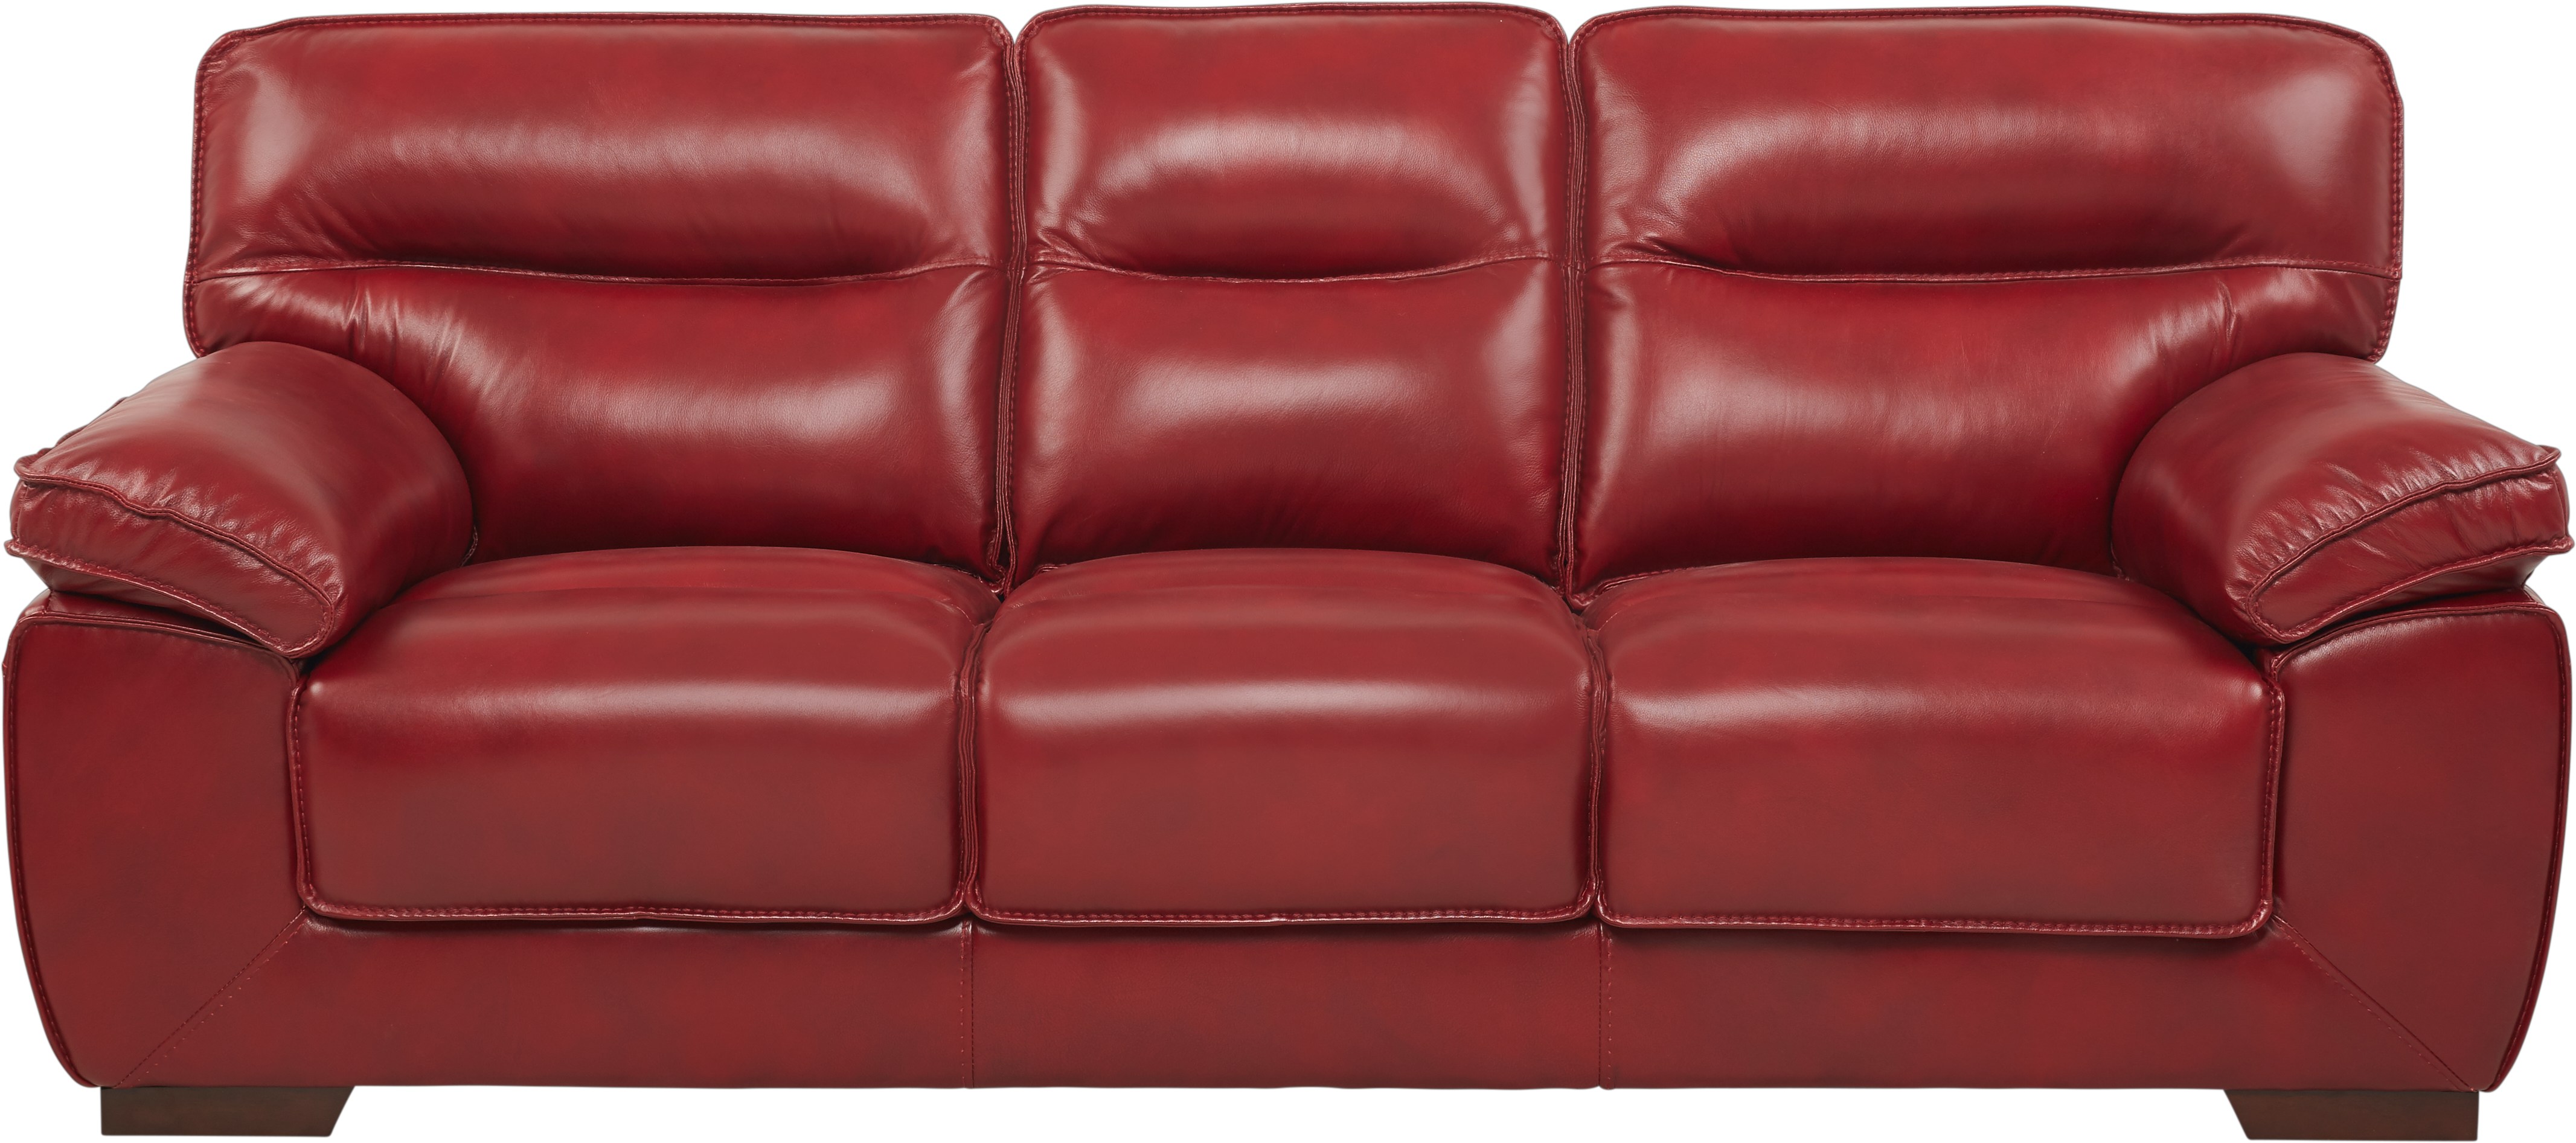 red leather sofa conditioner